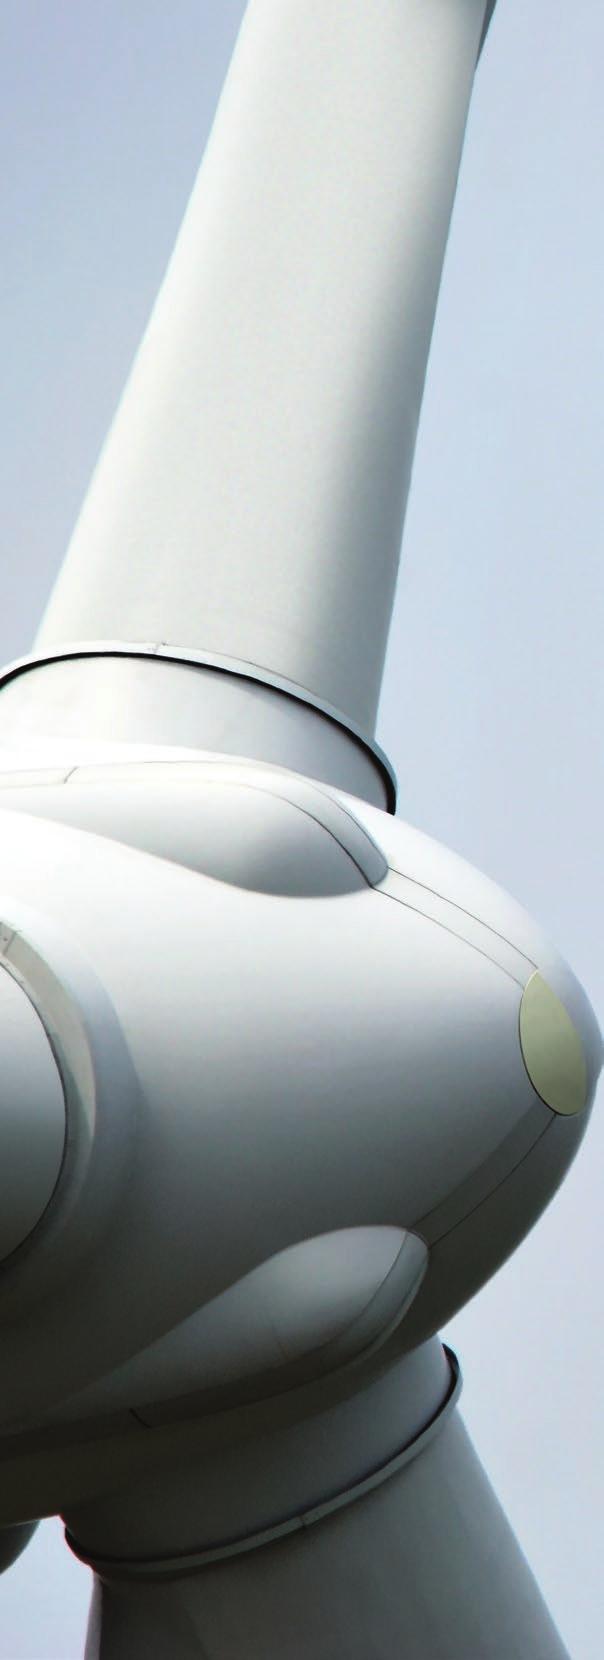 A world of movement & opportunities for big wind turbines LINAK knows the market, and LINAK knows the opportunities wind turbine manufacturers have for using LINAK solutions.